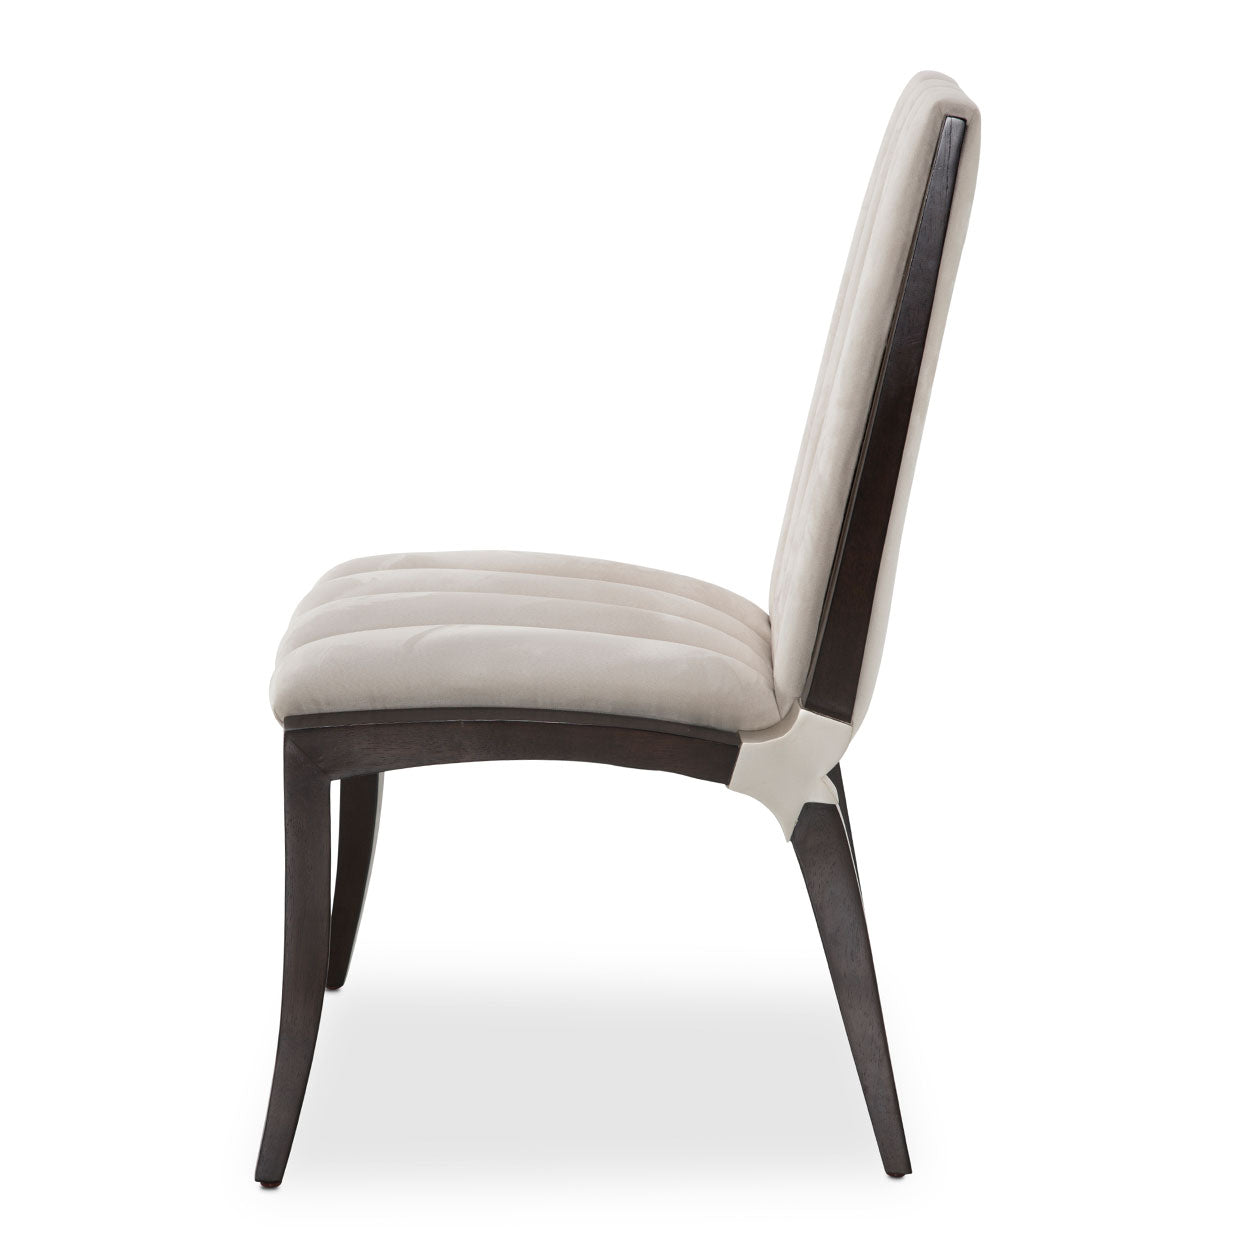 Paris Chic Side Chair, Style, Neutral channeling, Bold frame, Upgrade, Mealtime, Espresso-finished hardwood, Figured Eucalyptus Veneer, Faux suede upholstery, Channeling, dream art , Michael amini